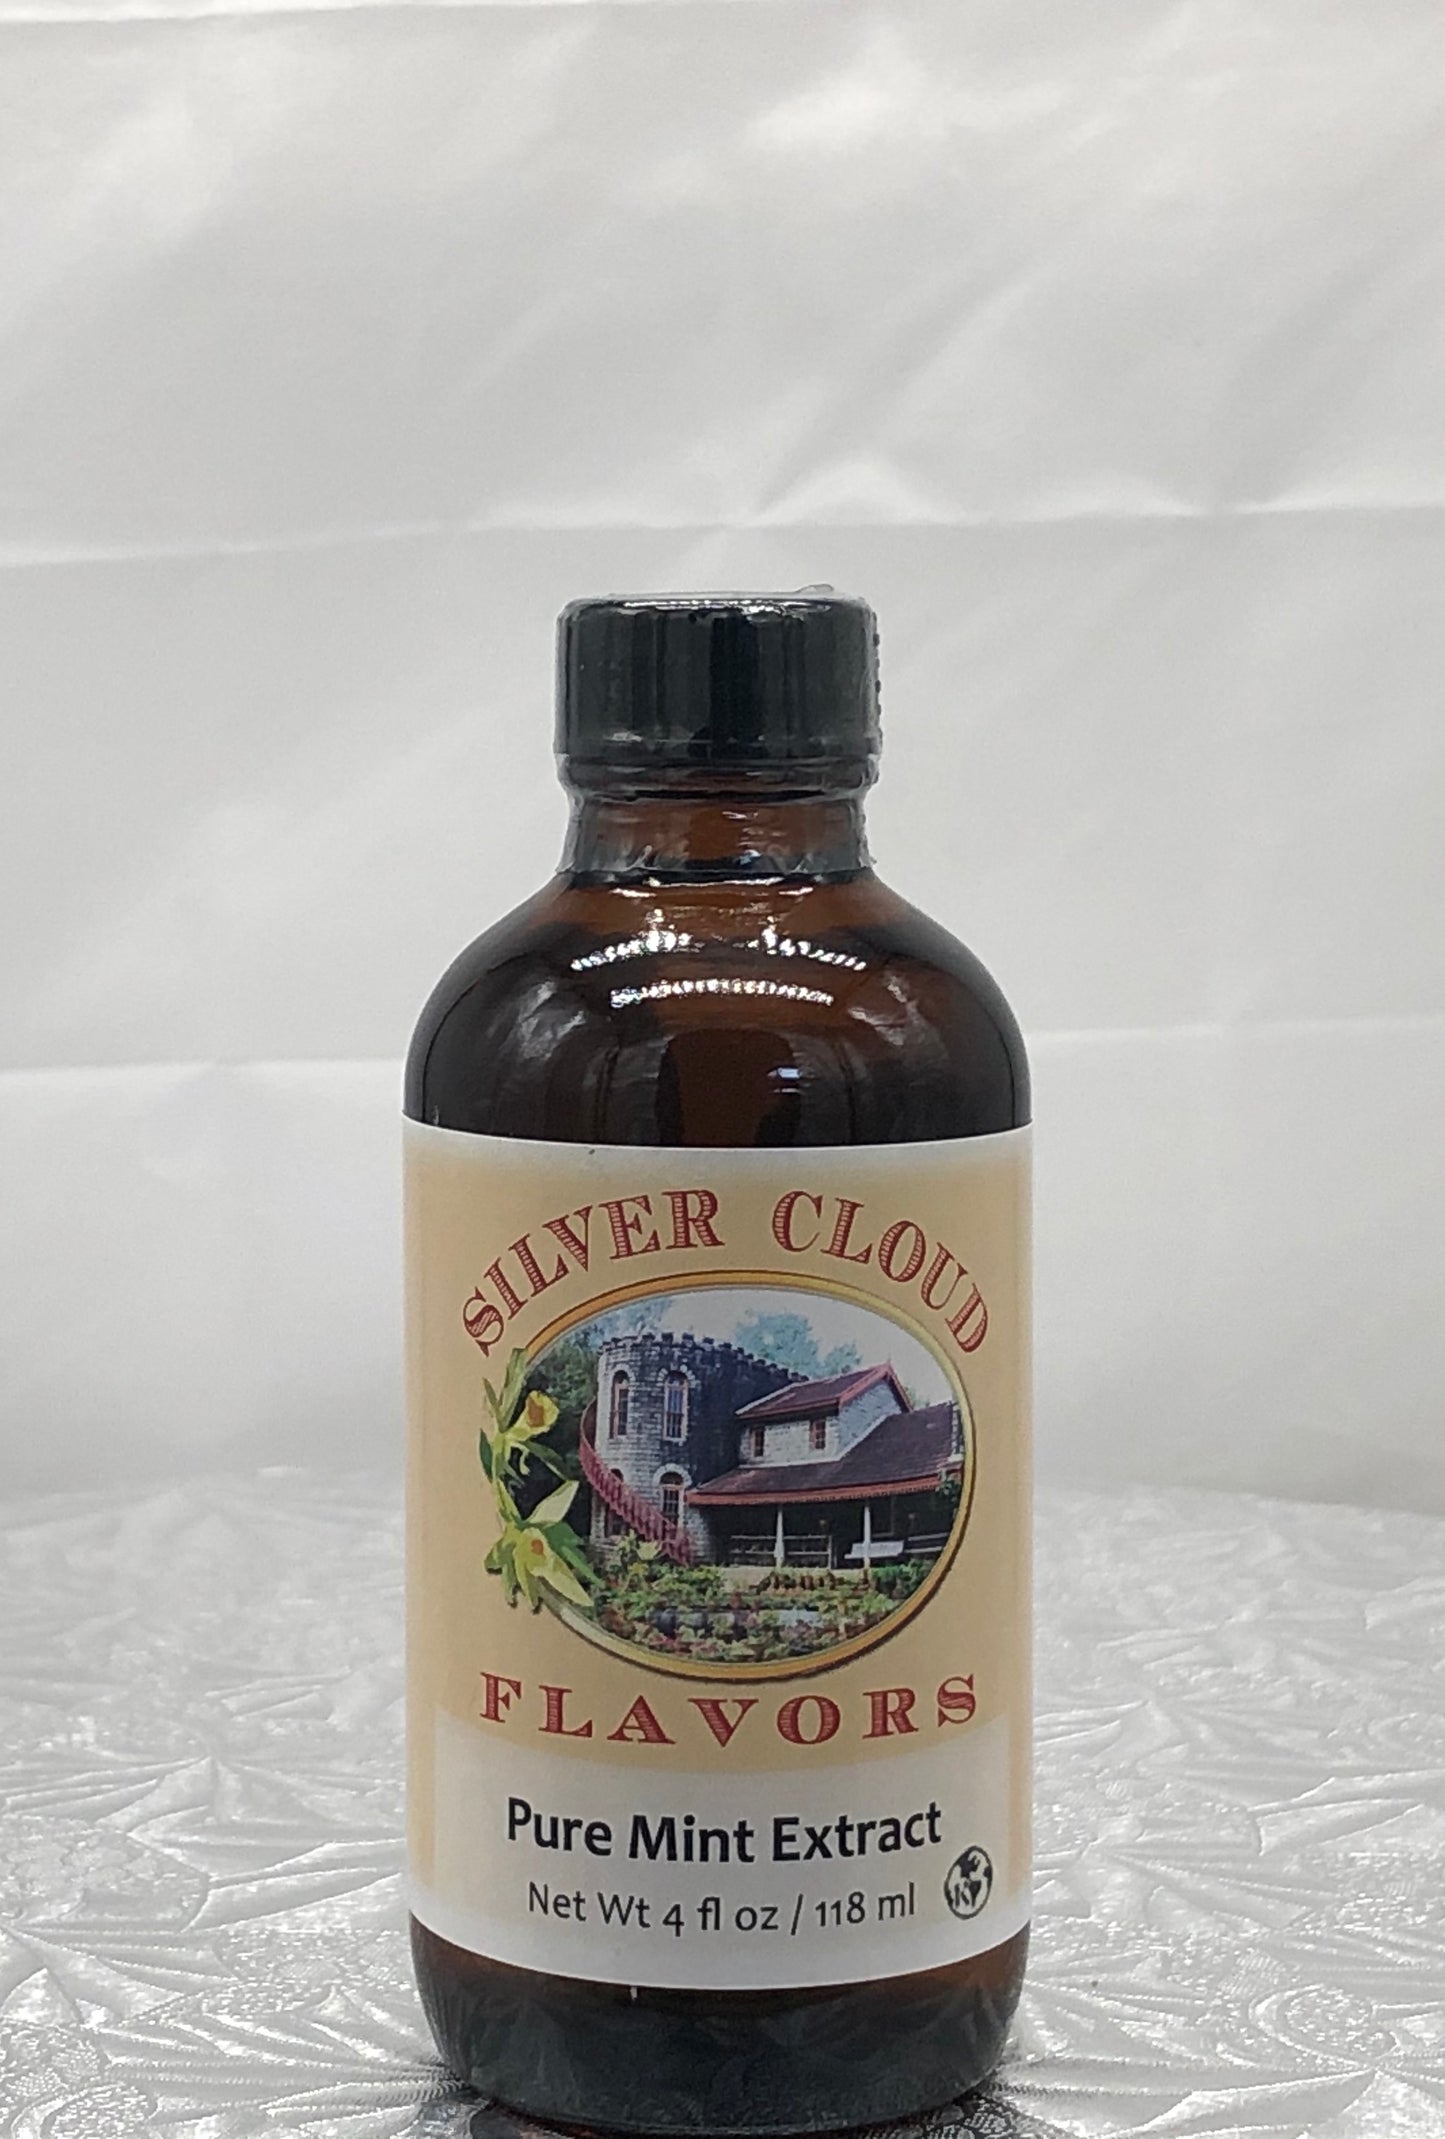 Pure Mint Extract, 4oz, Silver Cloud